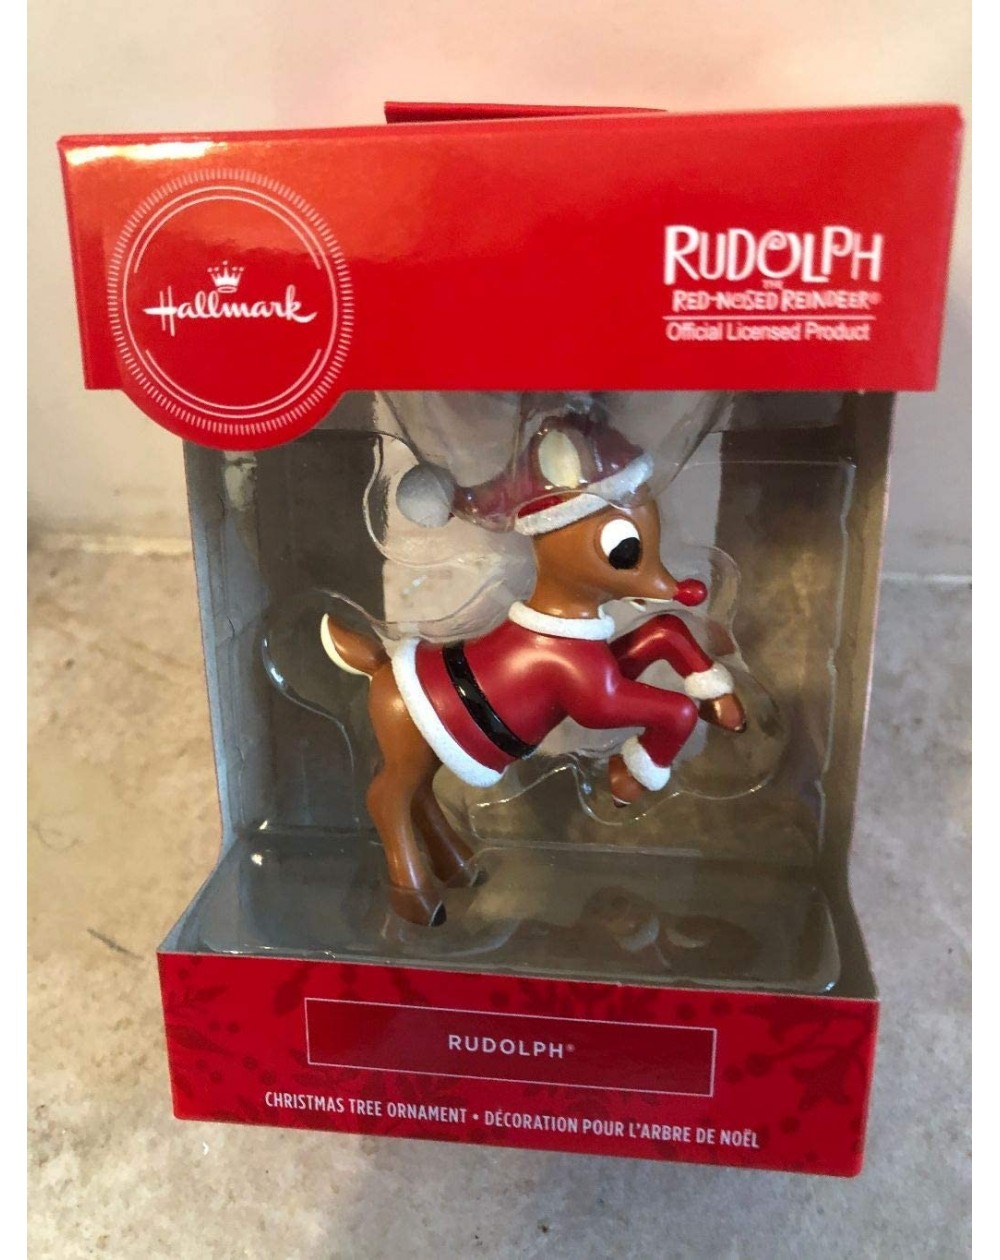 Ornaments Hallmark 2019-RED Box-Rudolph The RED Nosed Reindeer- Christmas Ornament-RED Box - CP18YLR7K0O $15.69